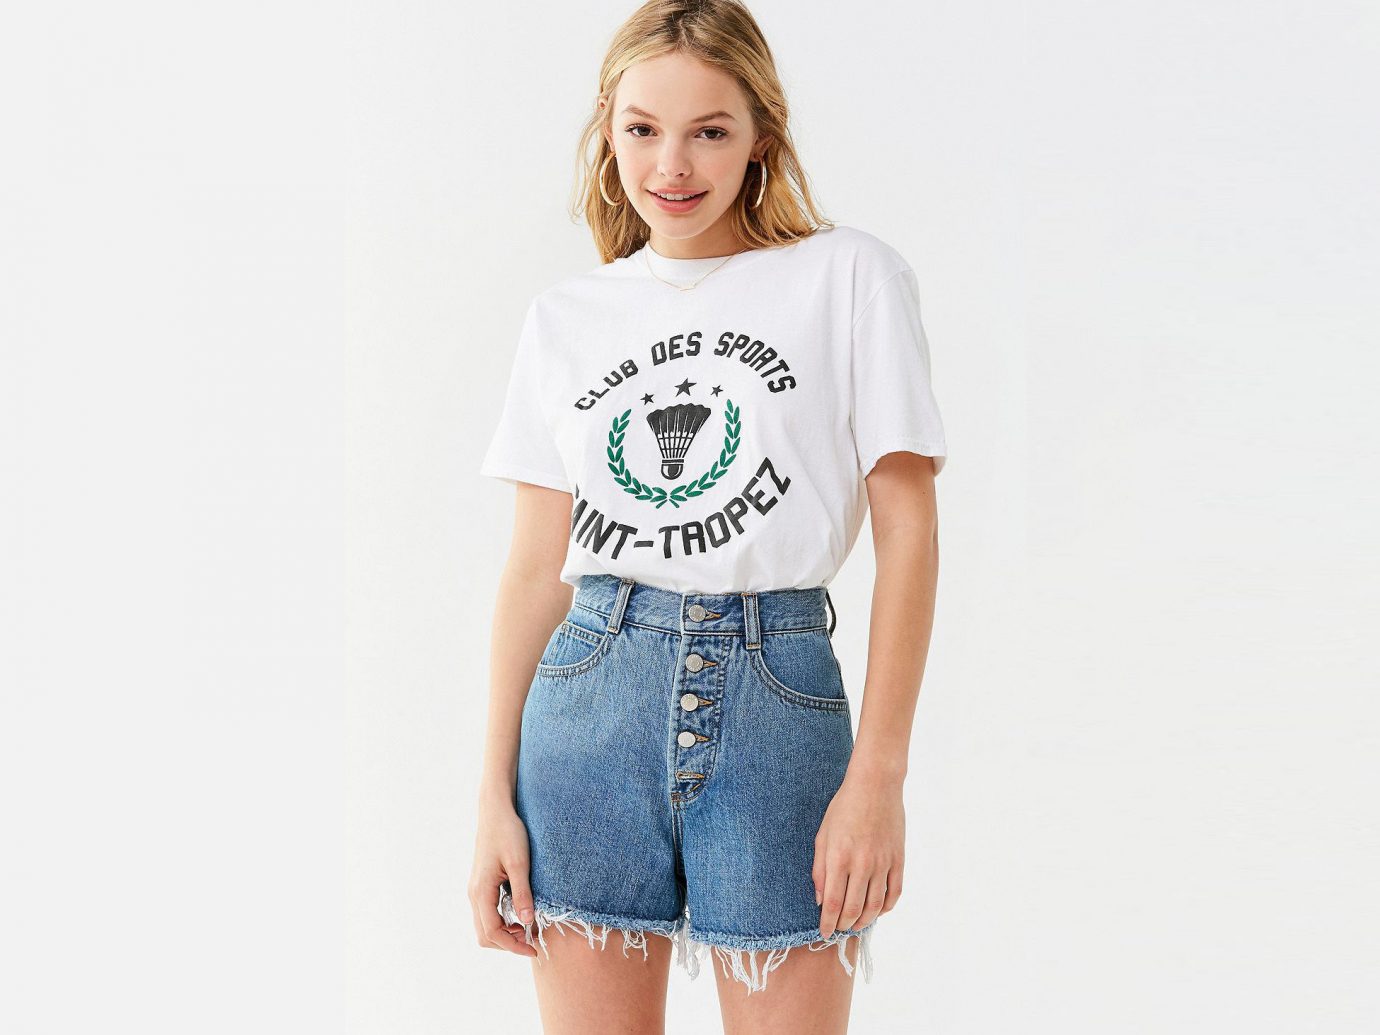 Spring Travel Style + Design Summer Travel Travel Shop person clothing standing t shirt shoulder sleeve joint jeans young fashion model waist shorts denim neck product one piece garment posing trouser